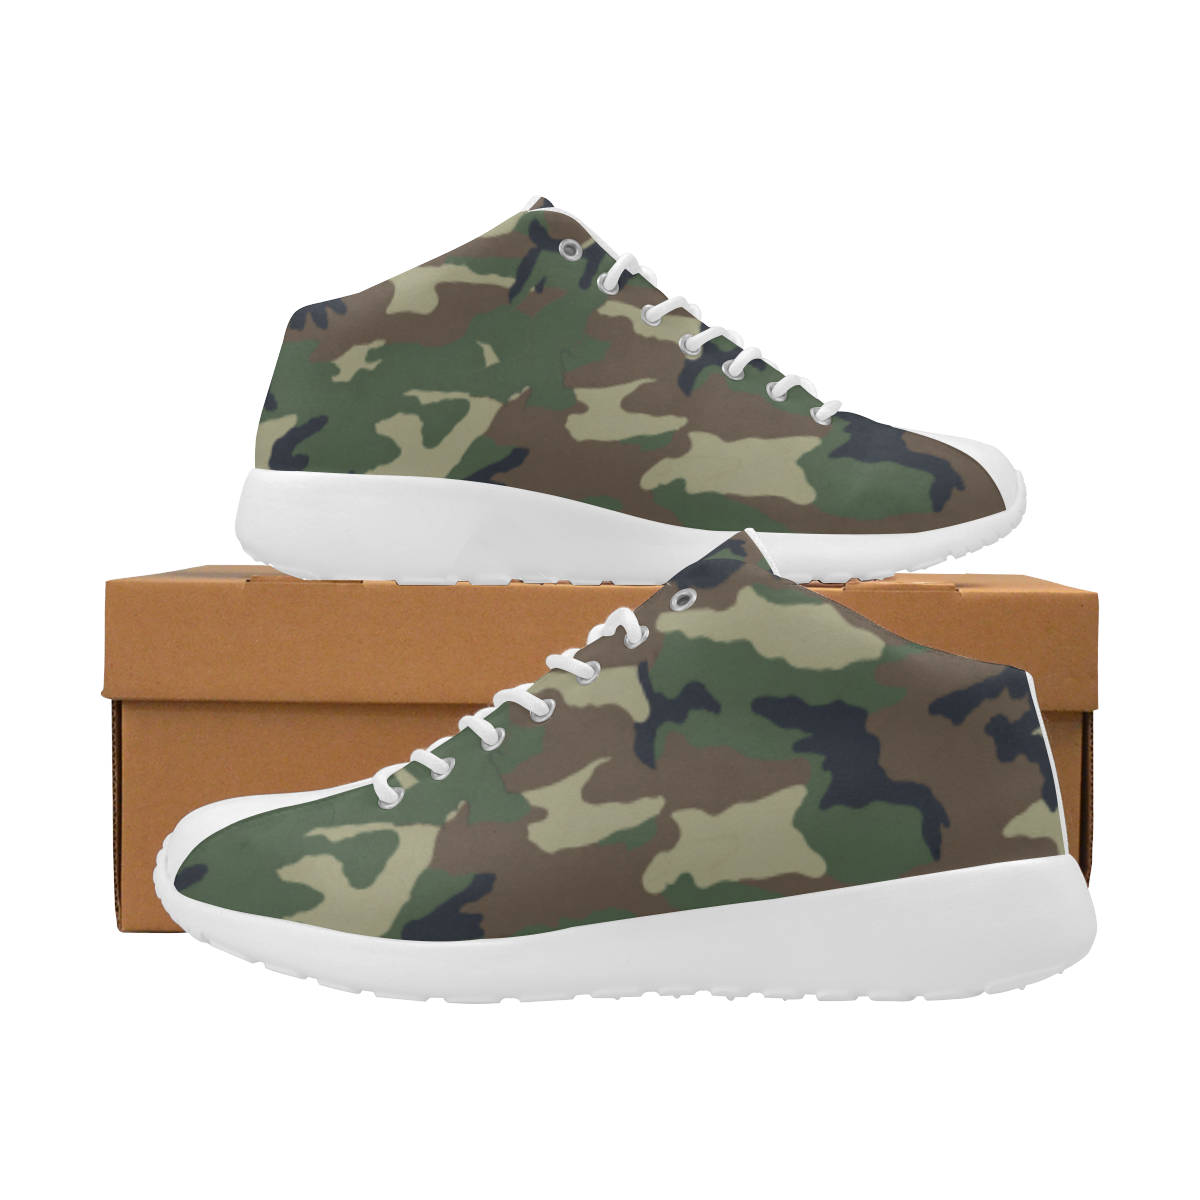 Woodland Forest Green Camouflage Women's Basketball Training Shoes (Model 47502)